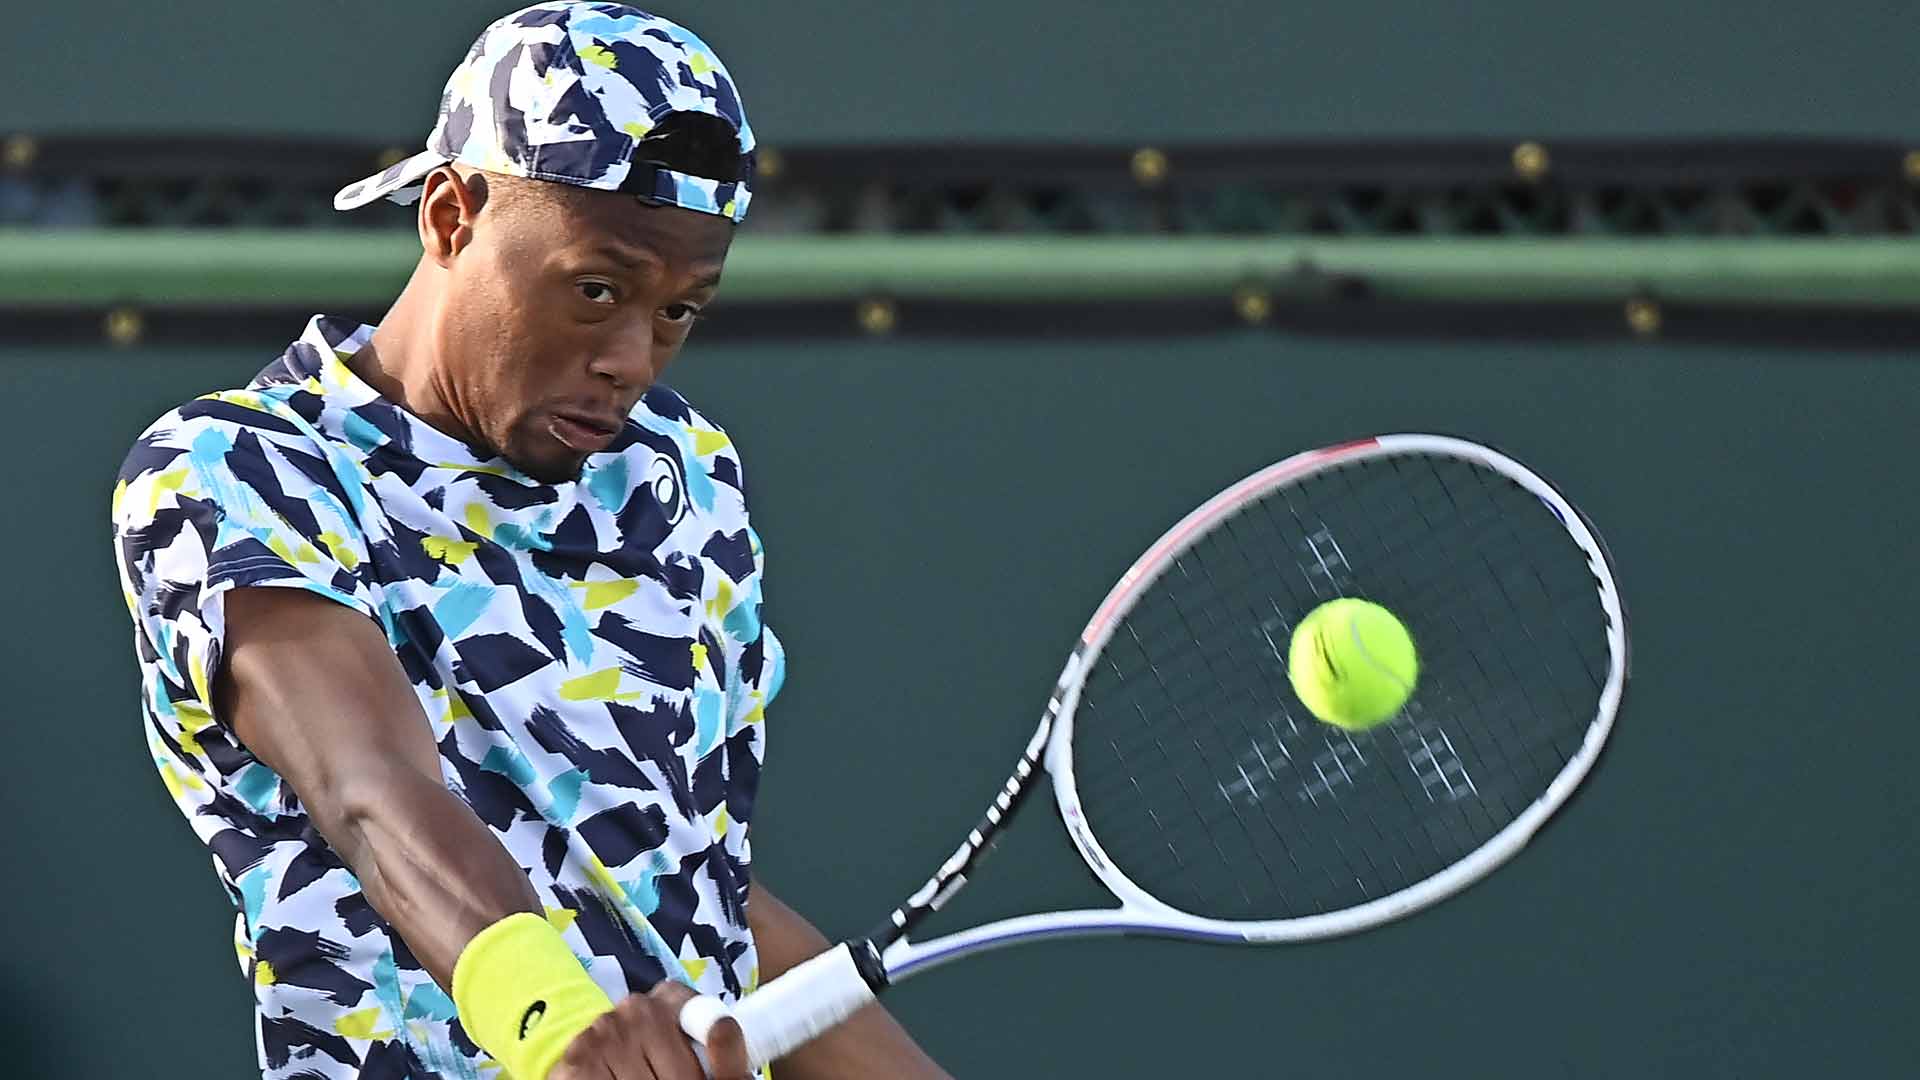 Christopher Eubanks is into the second round of the BNP Paribas Open for the second consecutive year.